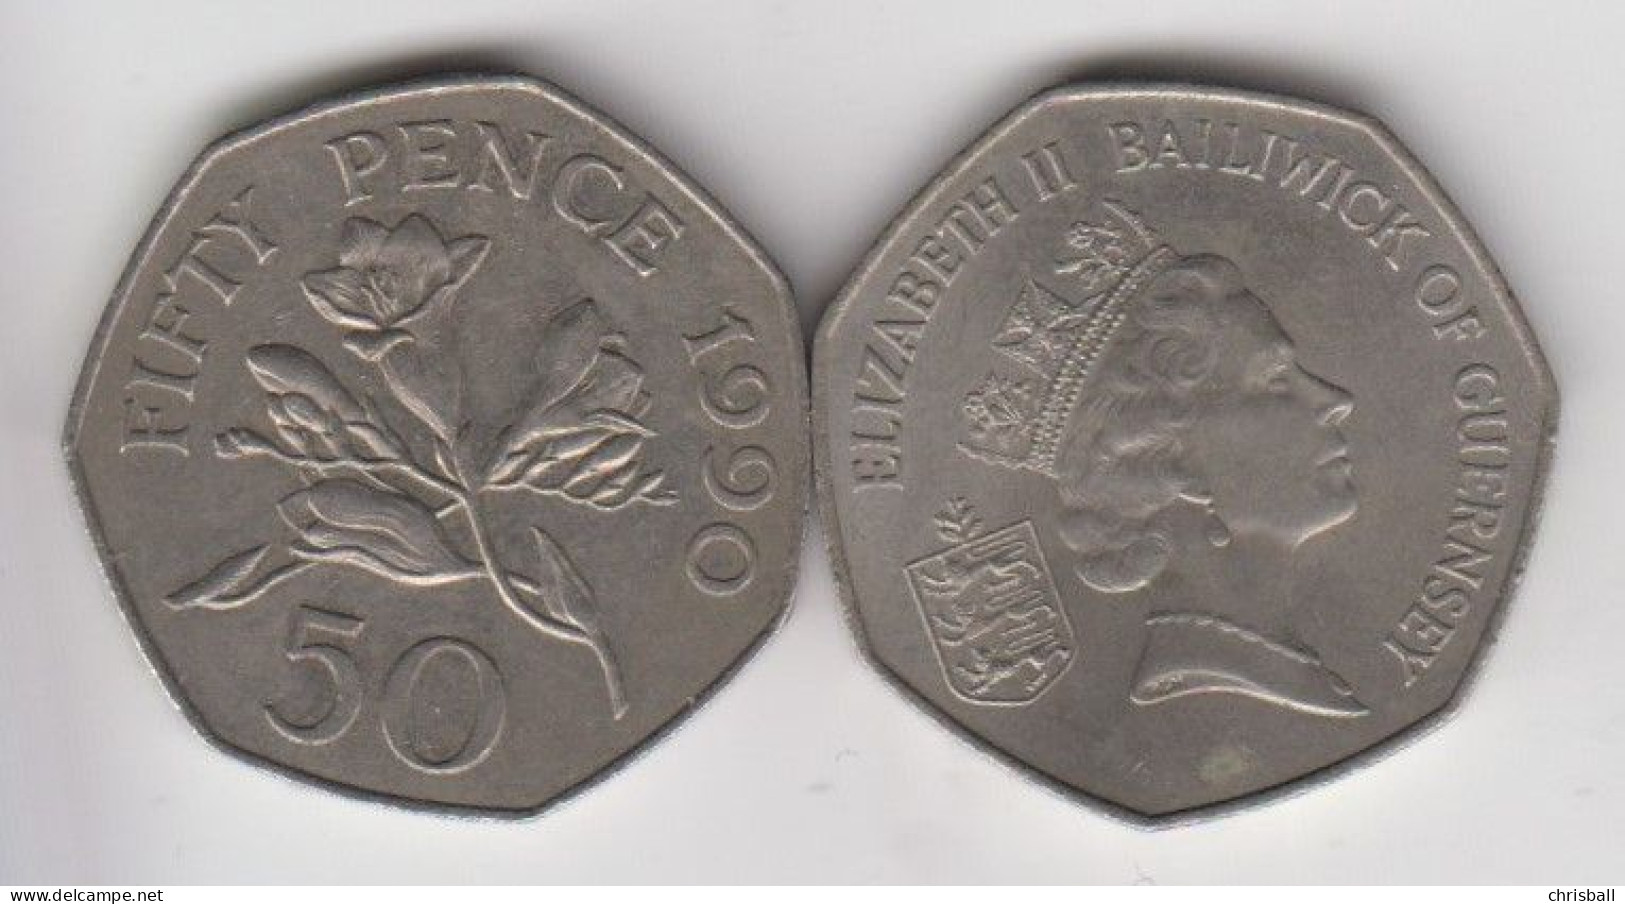 Guernsey 50p Fifty Pence Coin 1990 (Large Format) - Guernsey